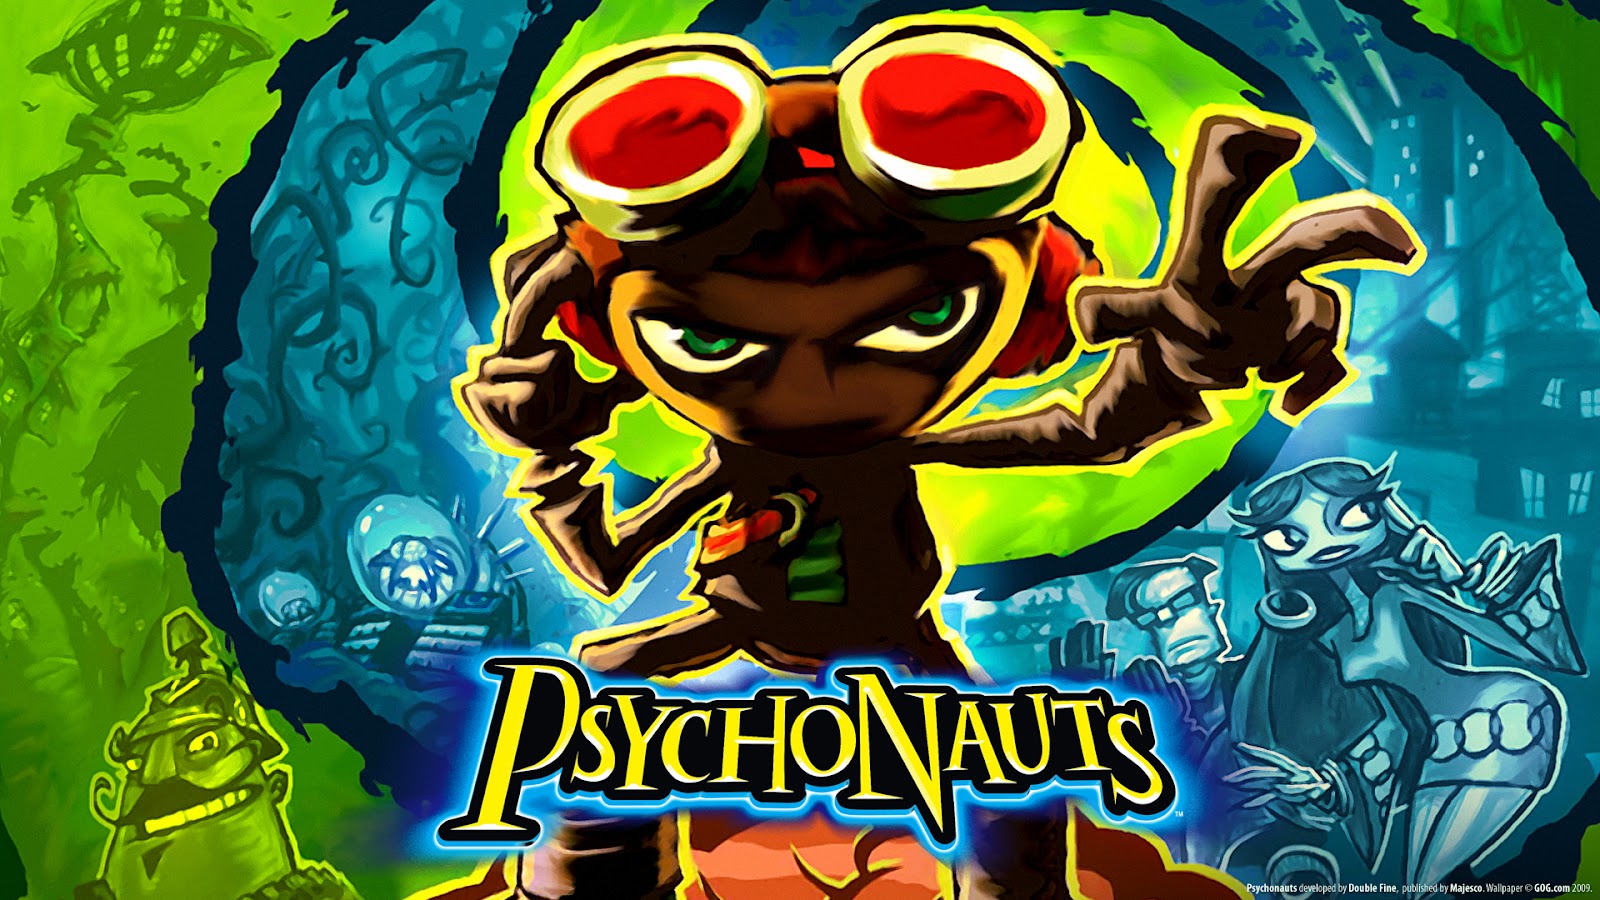 a portion of the original box art for Psychonauts. it features the main charaacter, Raz, standing on a brain with one hand up to his head and the other outstretched as if he is using psychic powers. green and blue spirals out behind him. inside the spiral are slightly transparent images of other characters from the game